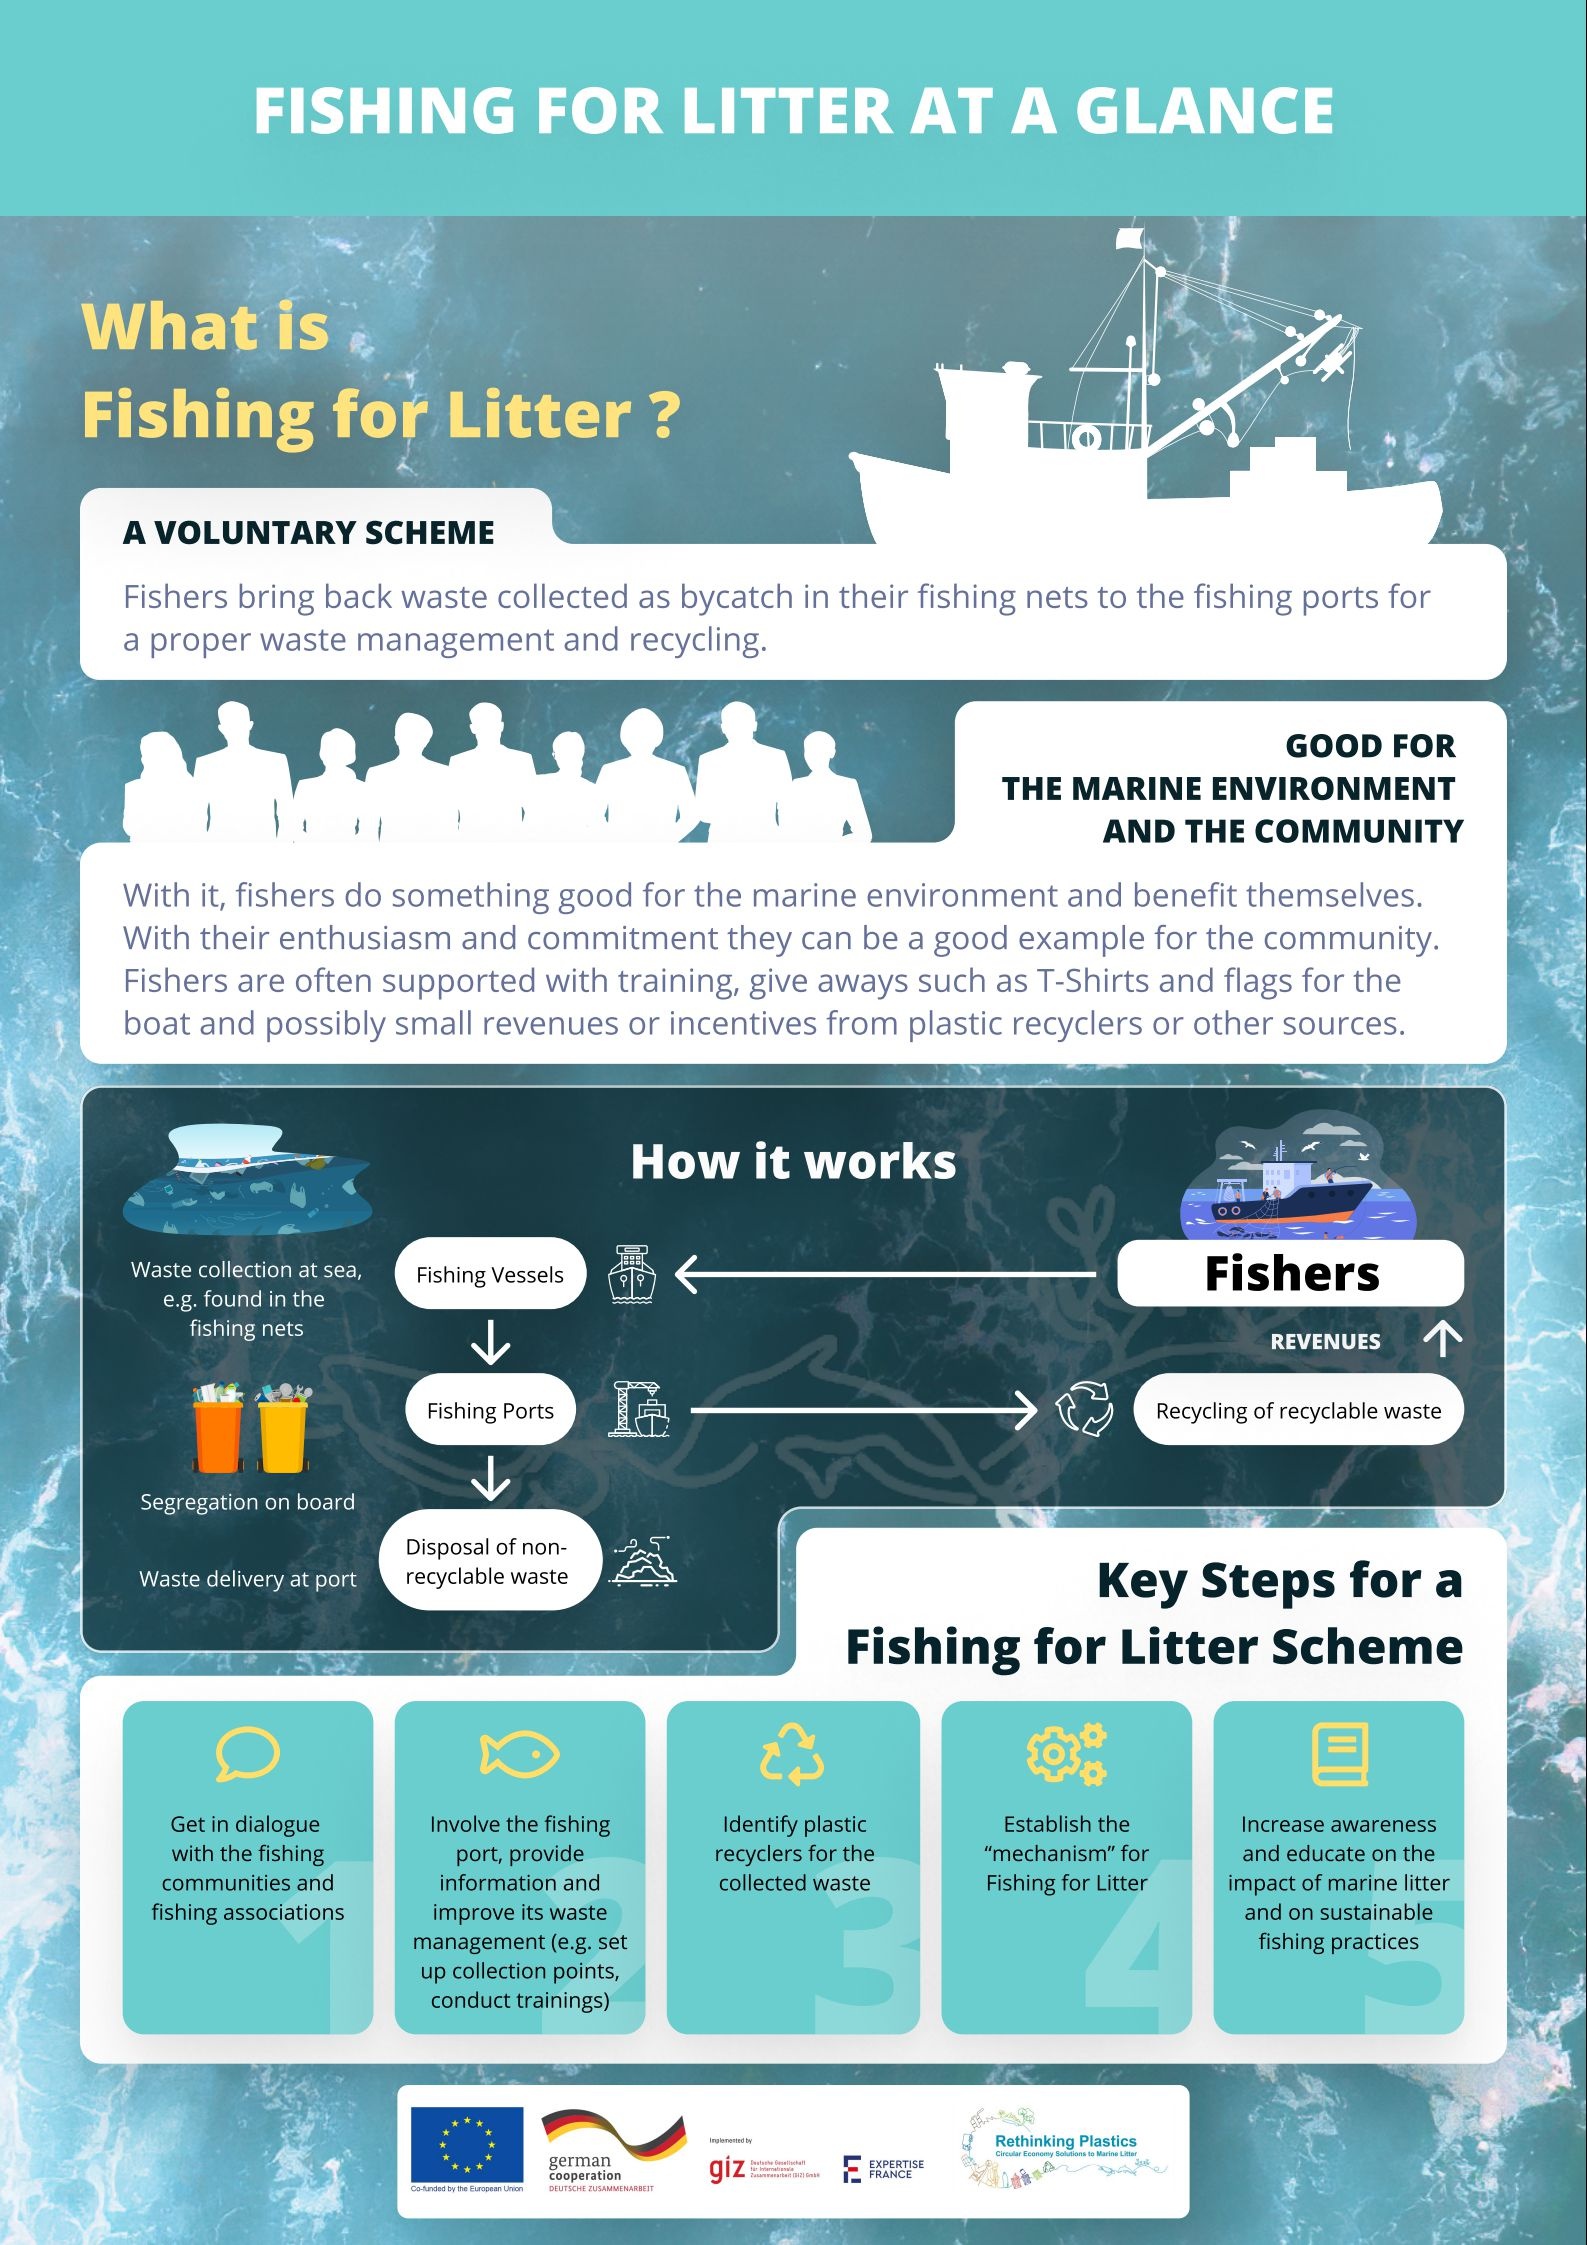 Fishers effectively contribute to reducing marine litter